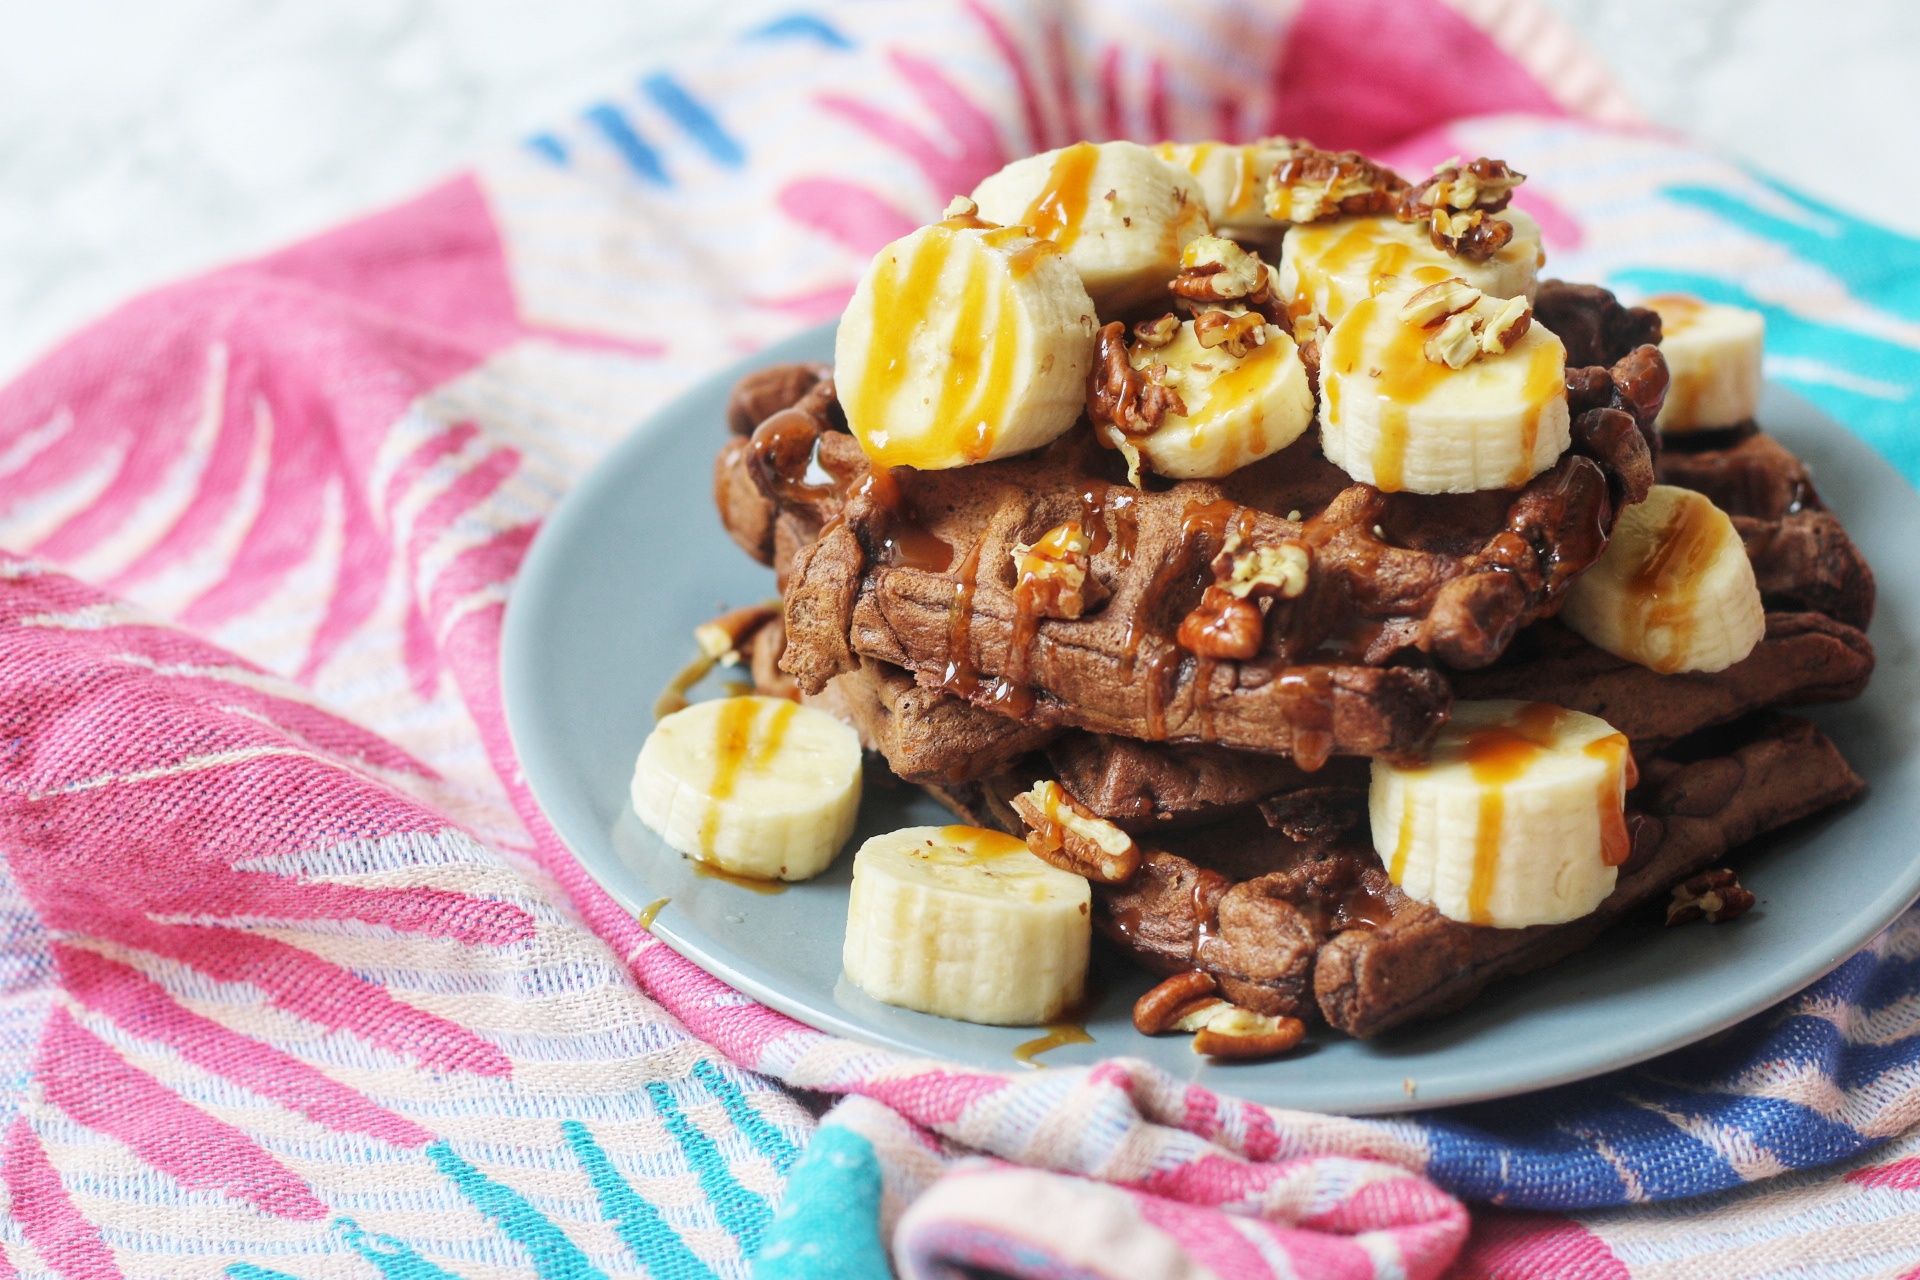 Chocolate Sourdough Waffles topped with banana, caramel and nuts